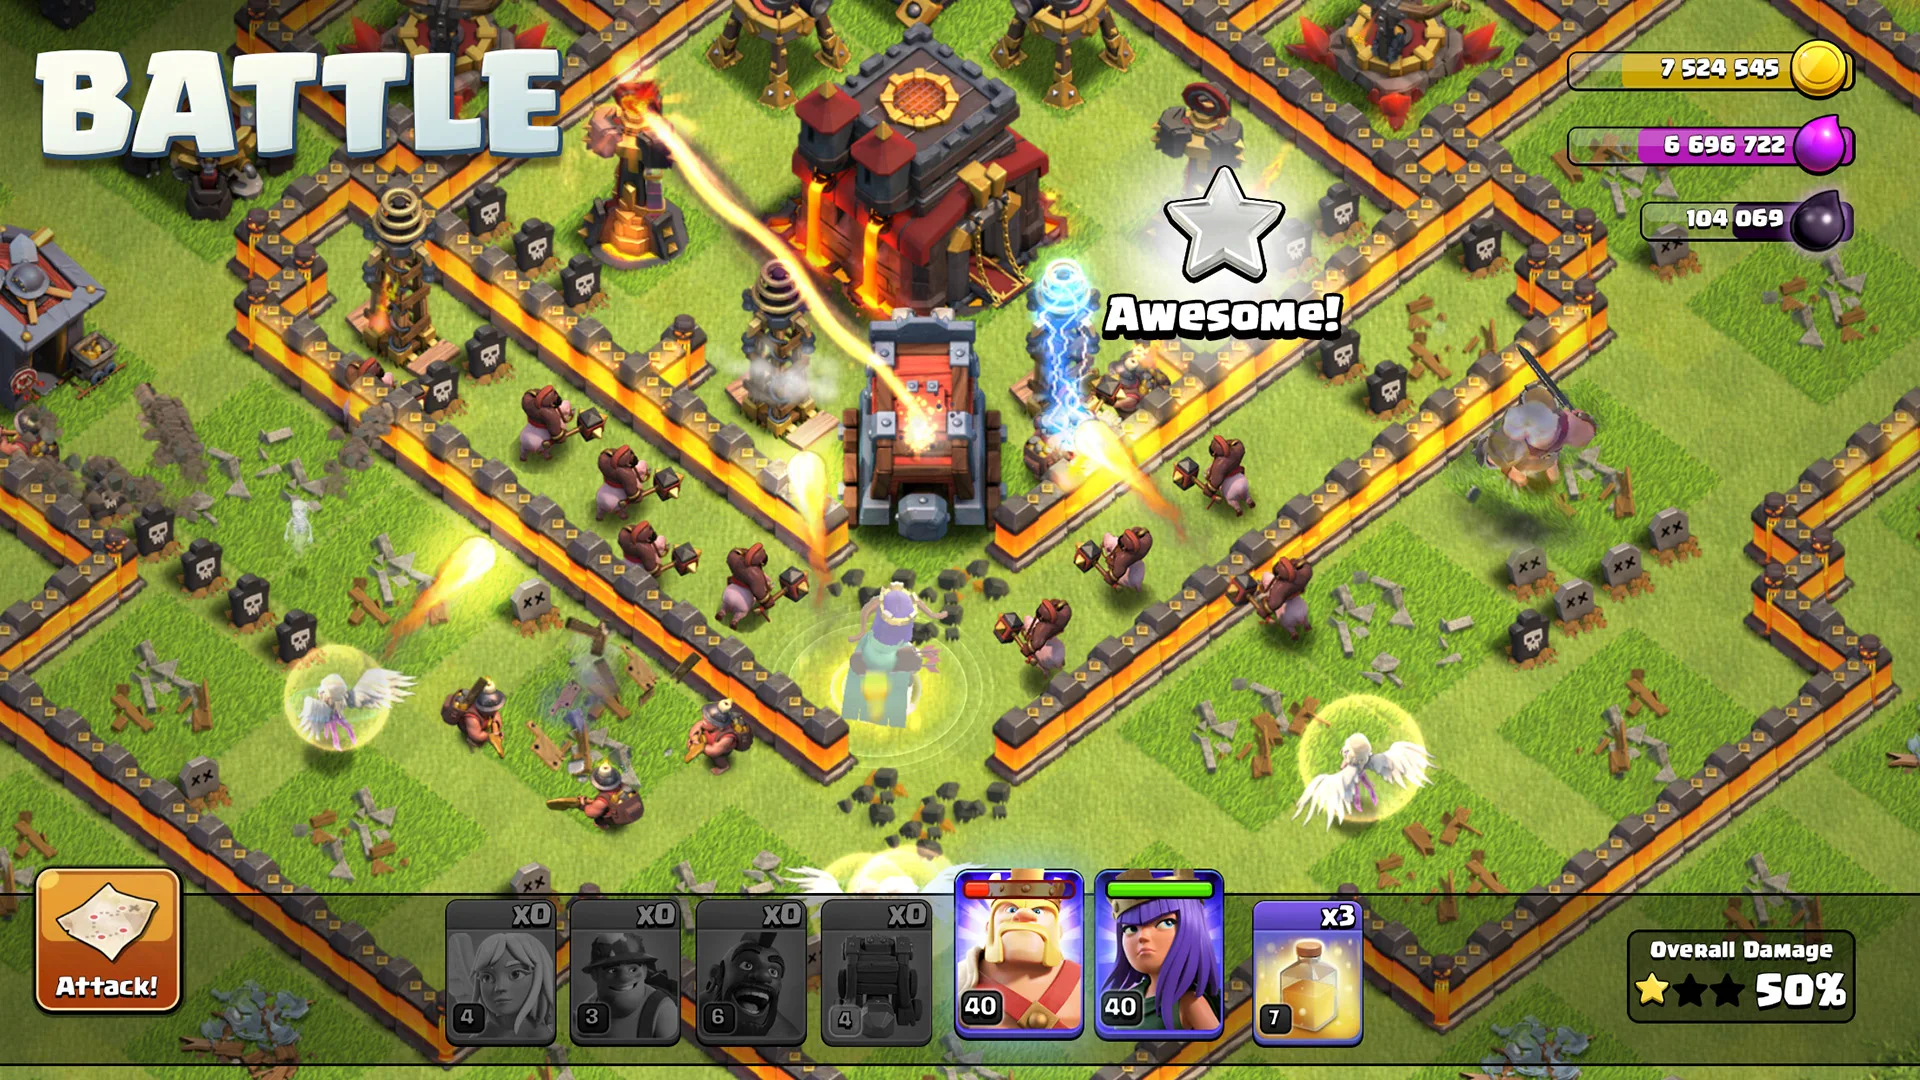 Clash of Kings v8.27.0 MOD APK (Unlimited Gold, Resources) Download